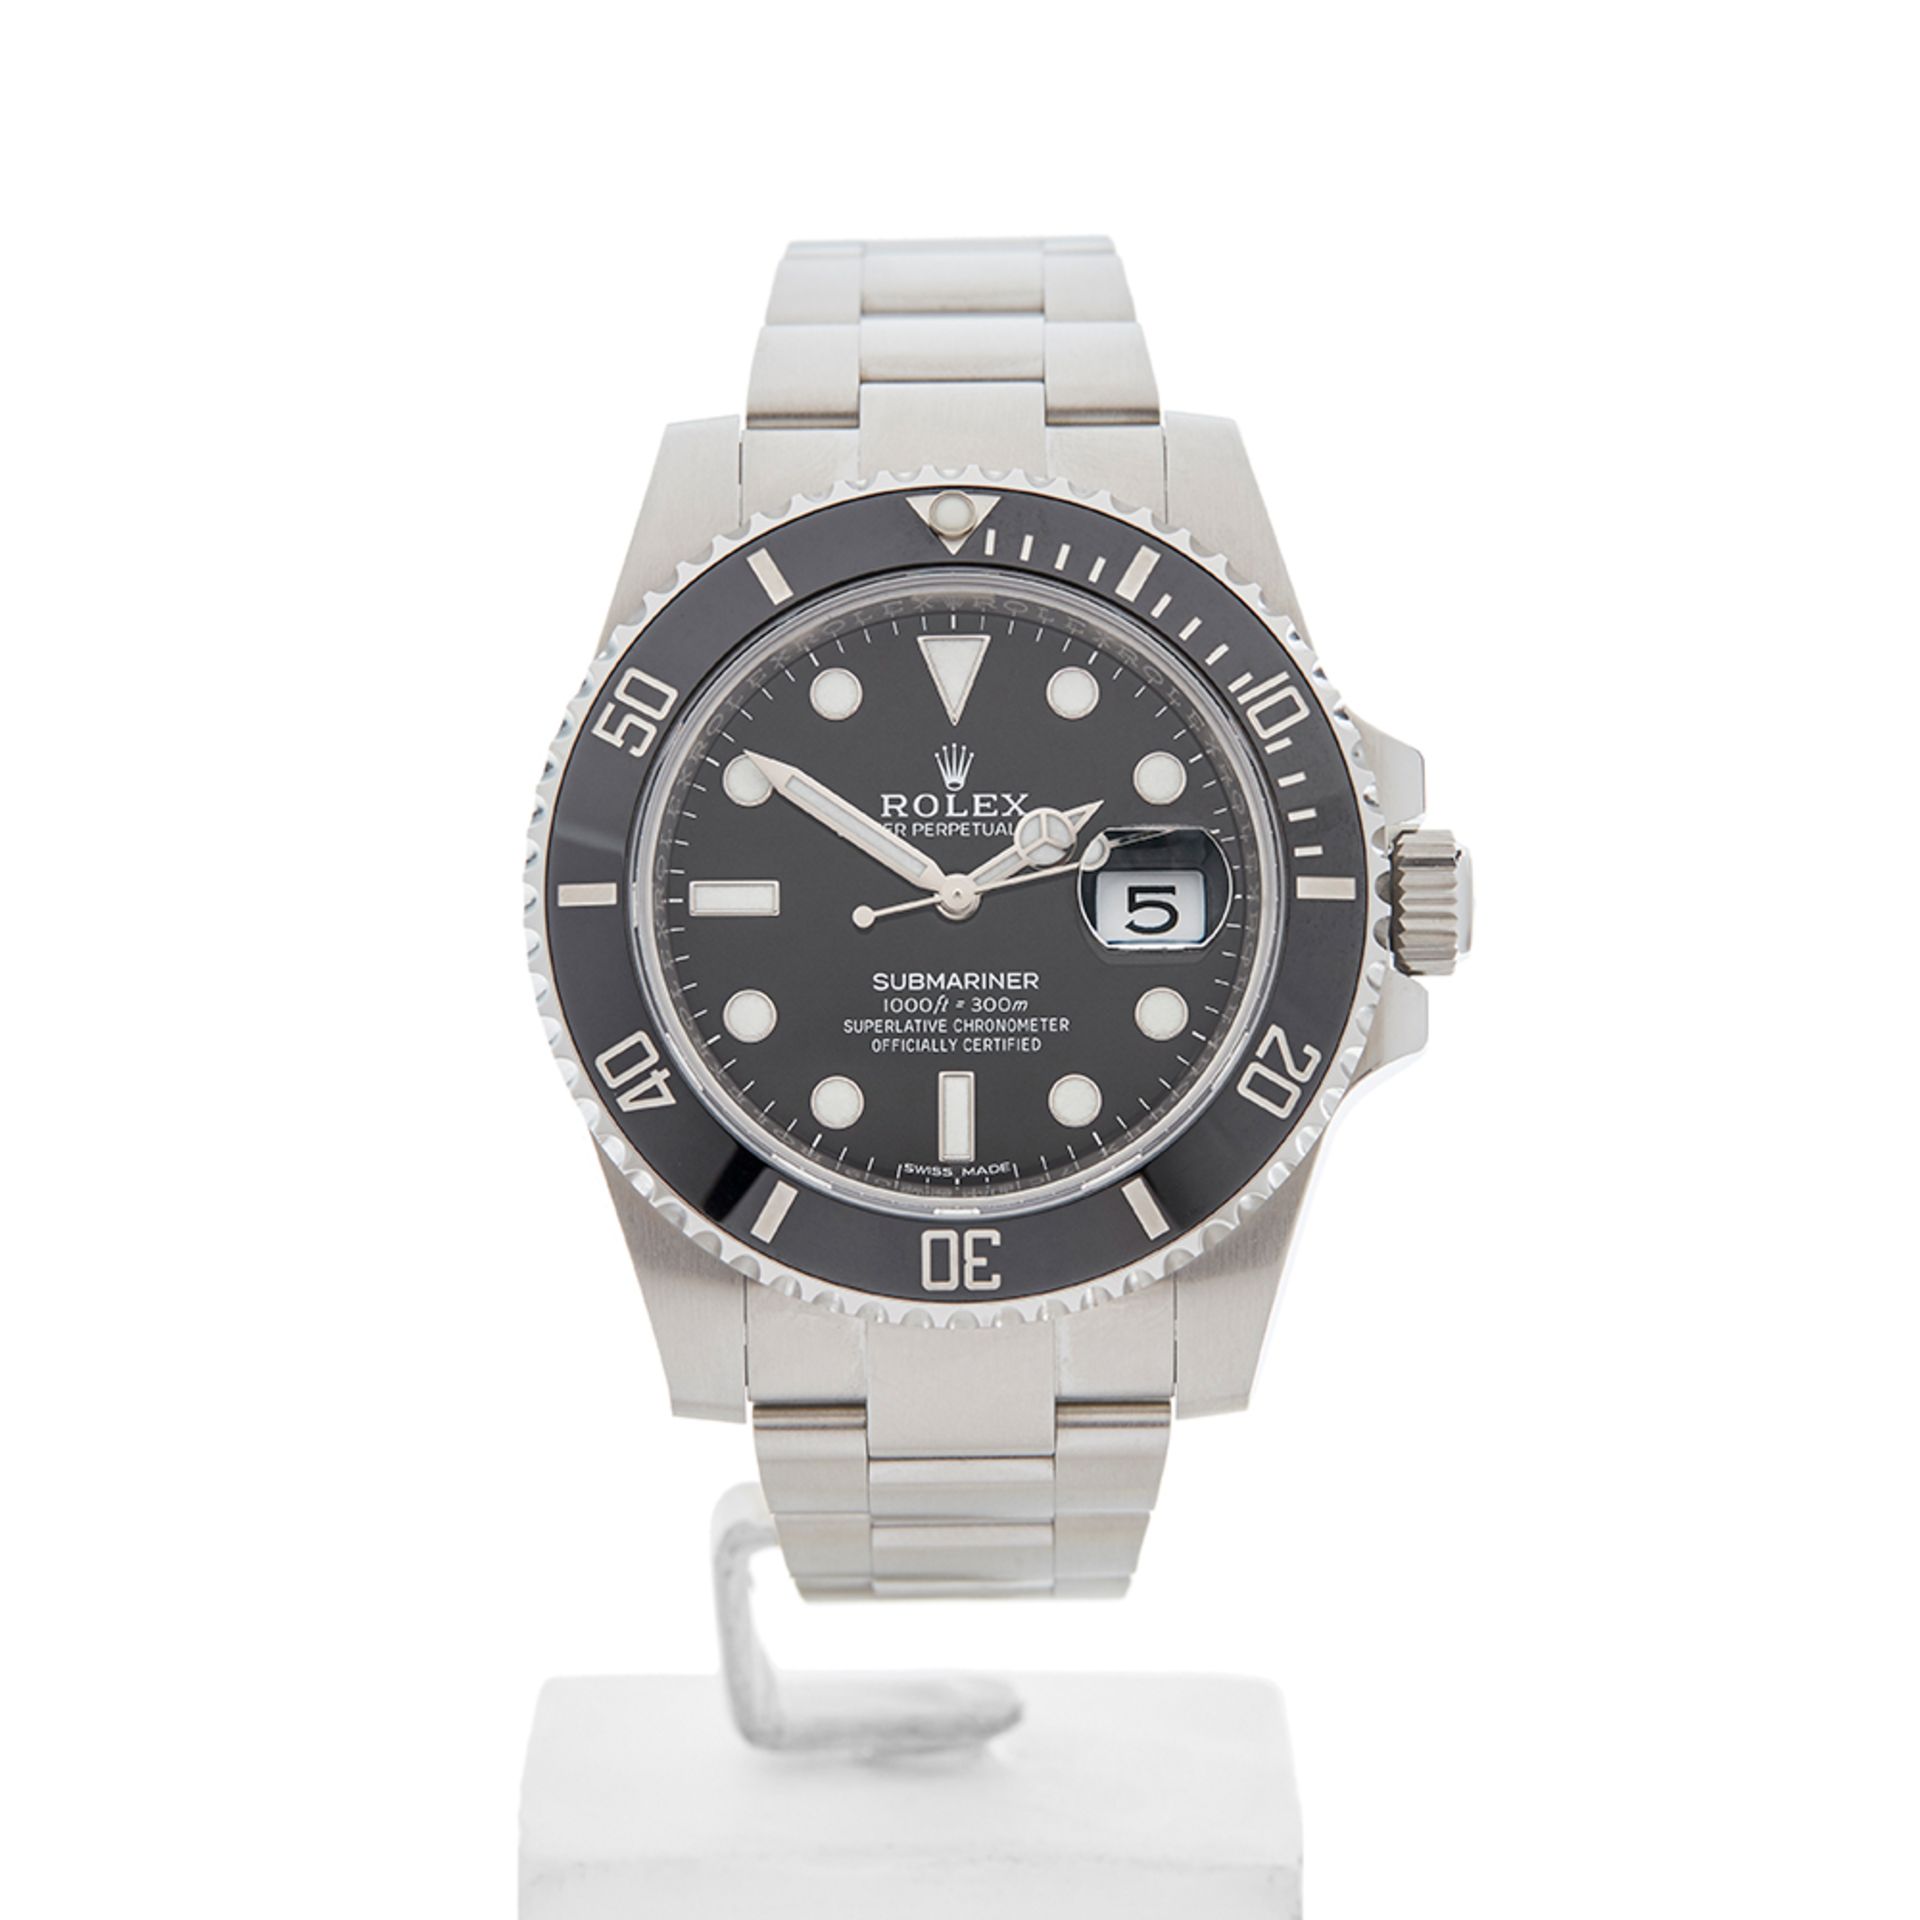 Rolex, Submariner Date 40mm Stainless Steel 116610LN - Image 2 of 8